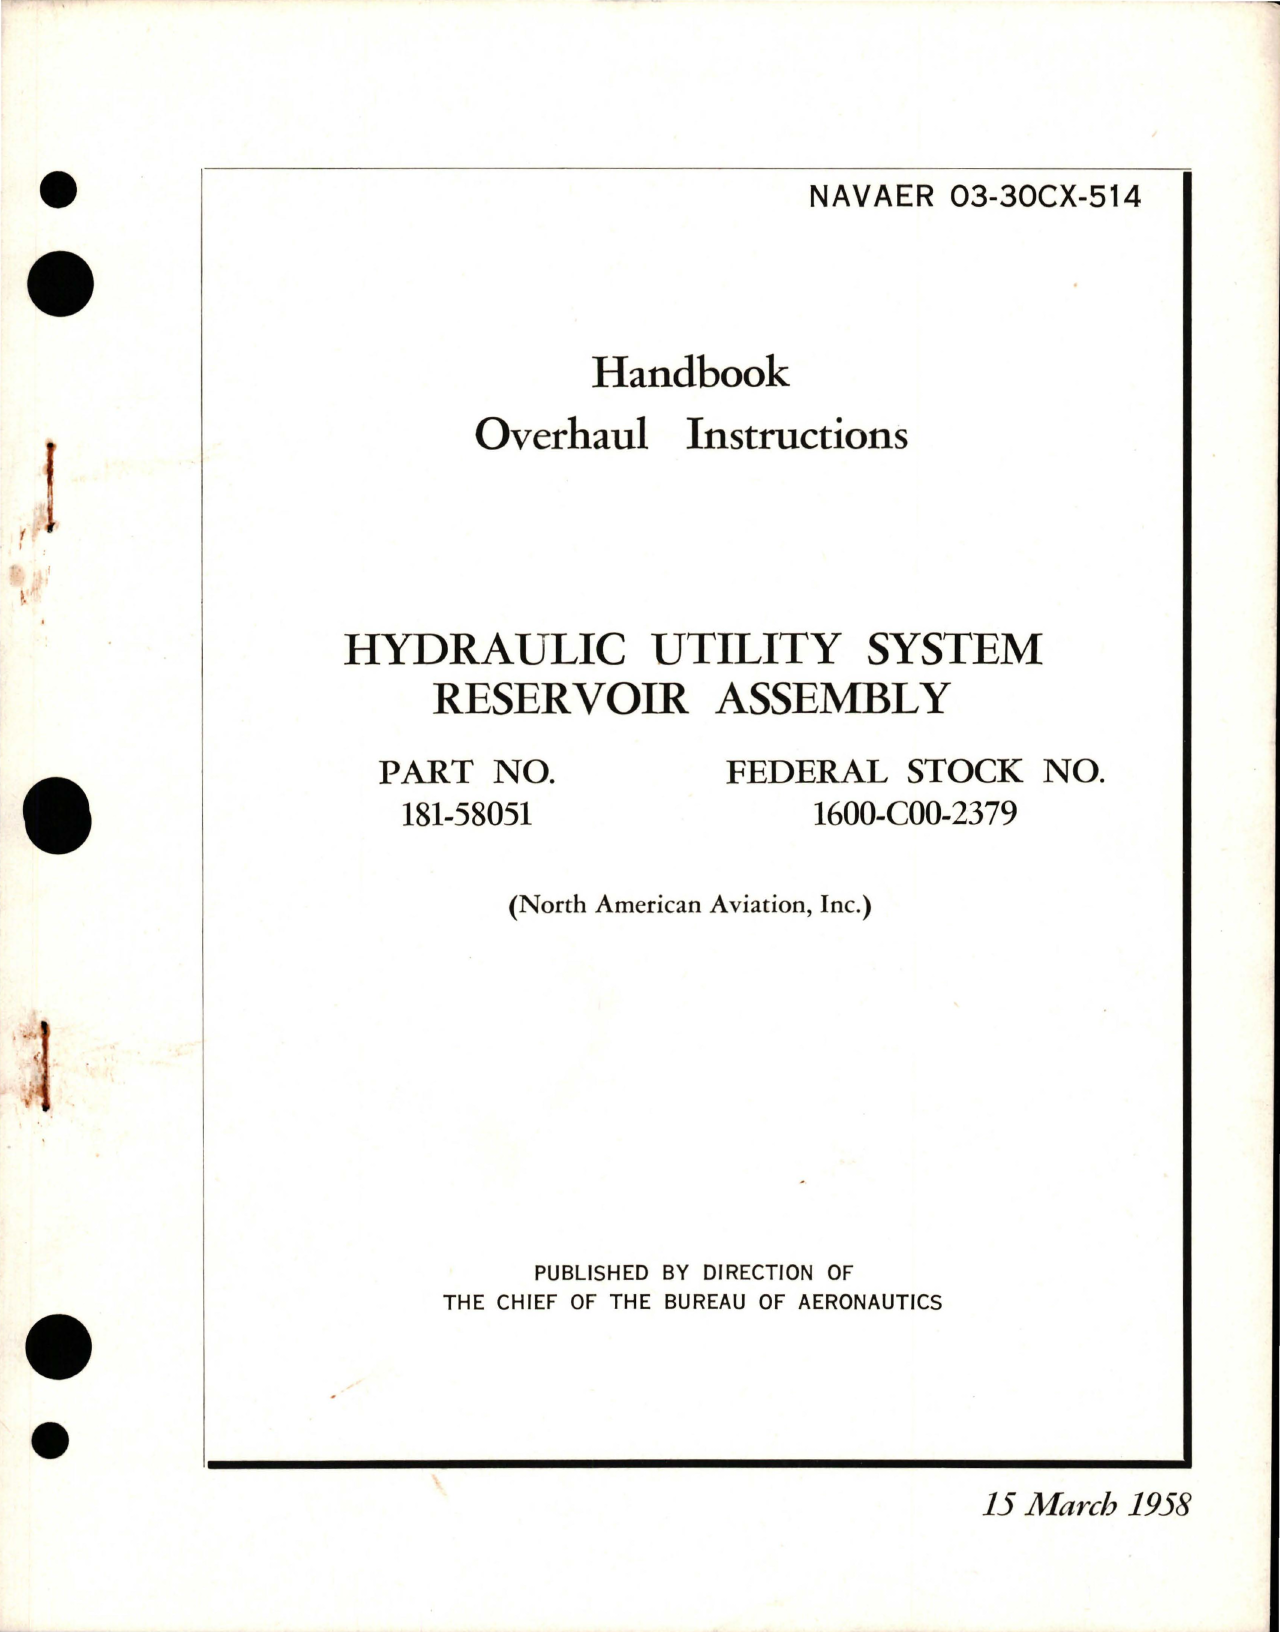 Sample page 1 from AirCorps Library document: Overhaul Instructions for Hydraulic Utility System Reservoir Assembly - Part 181-58051